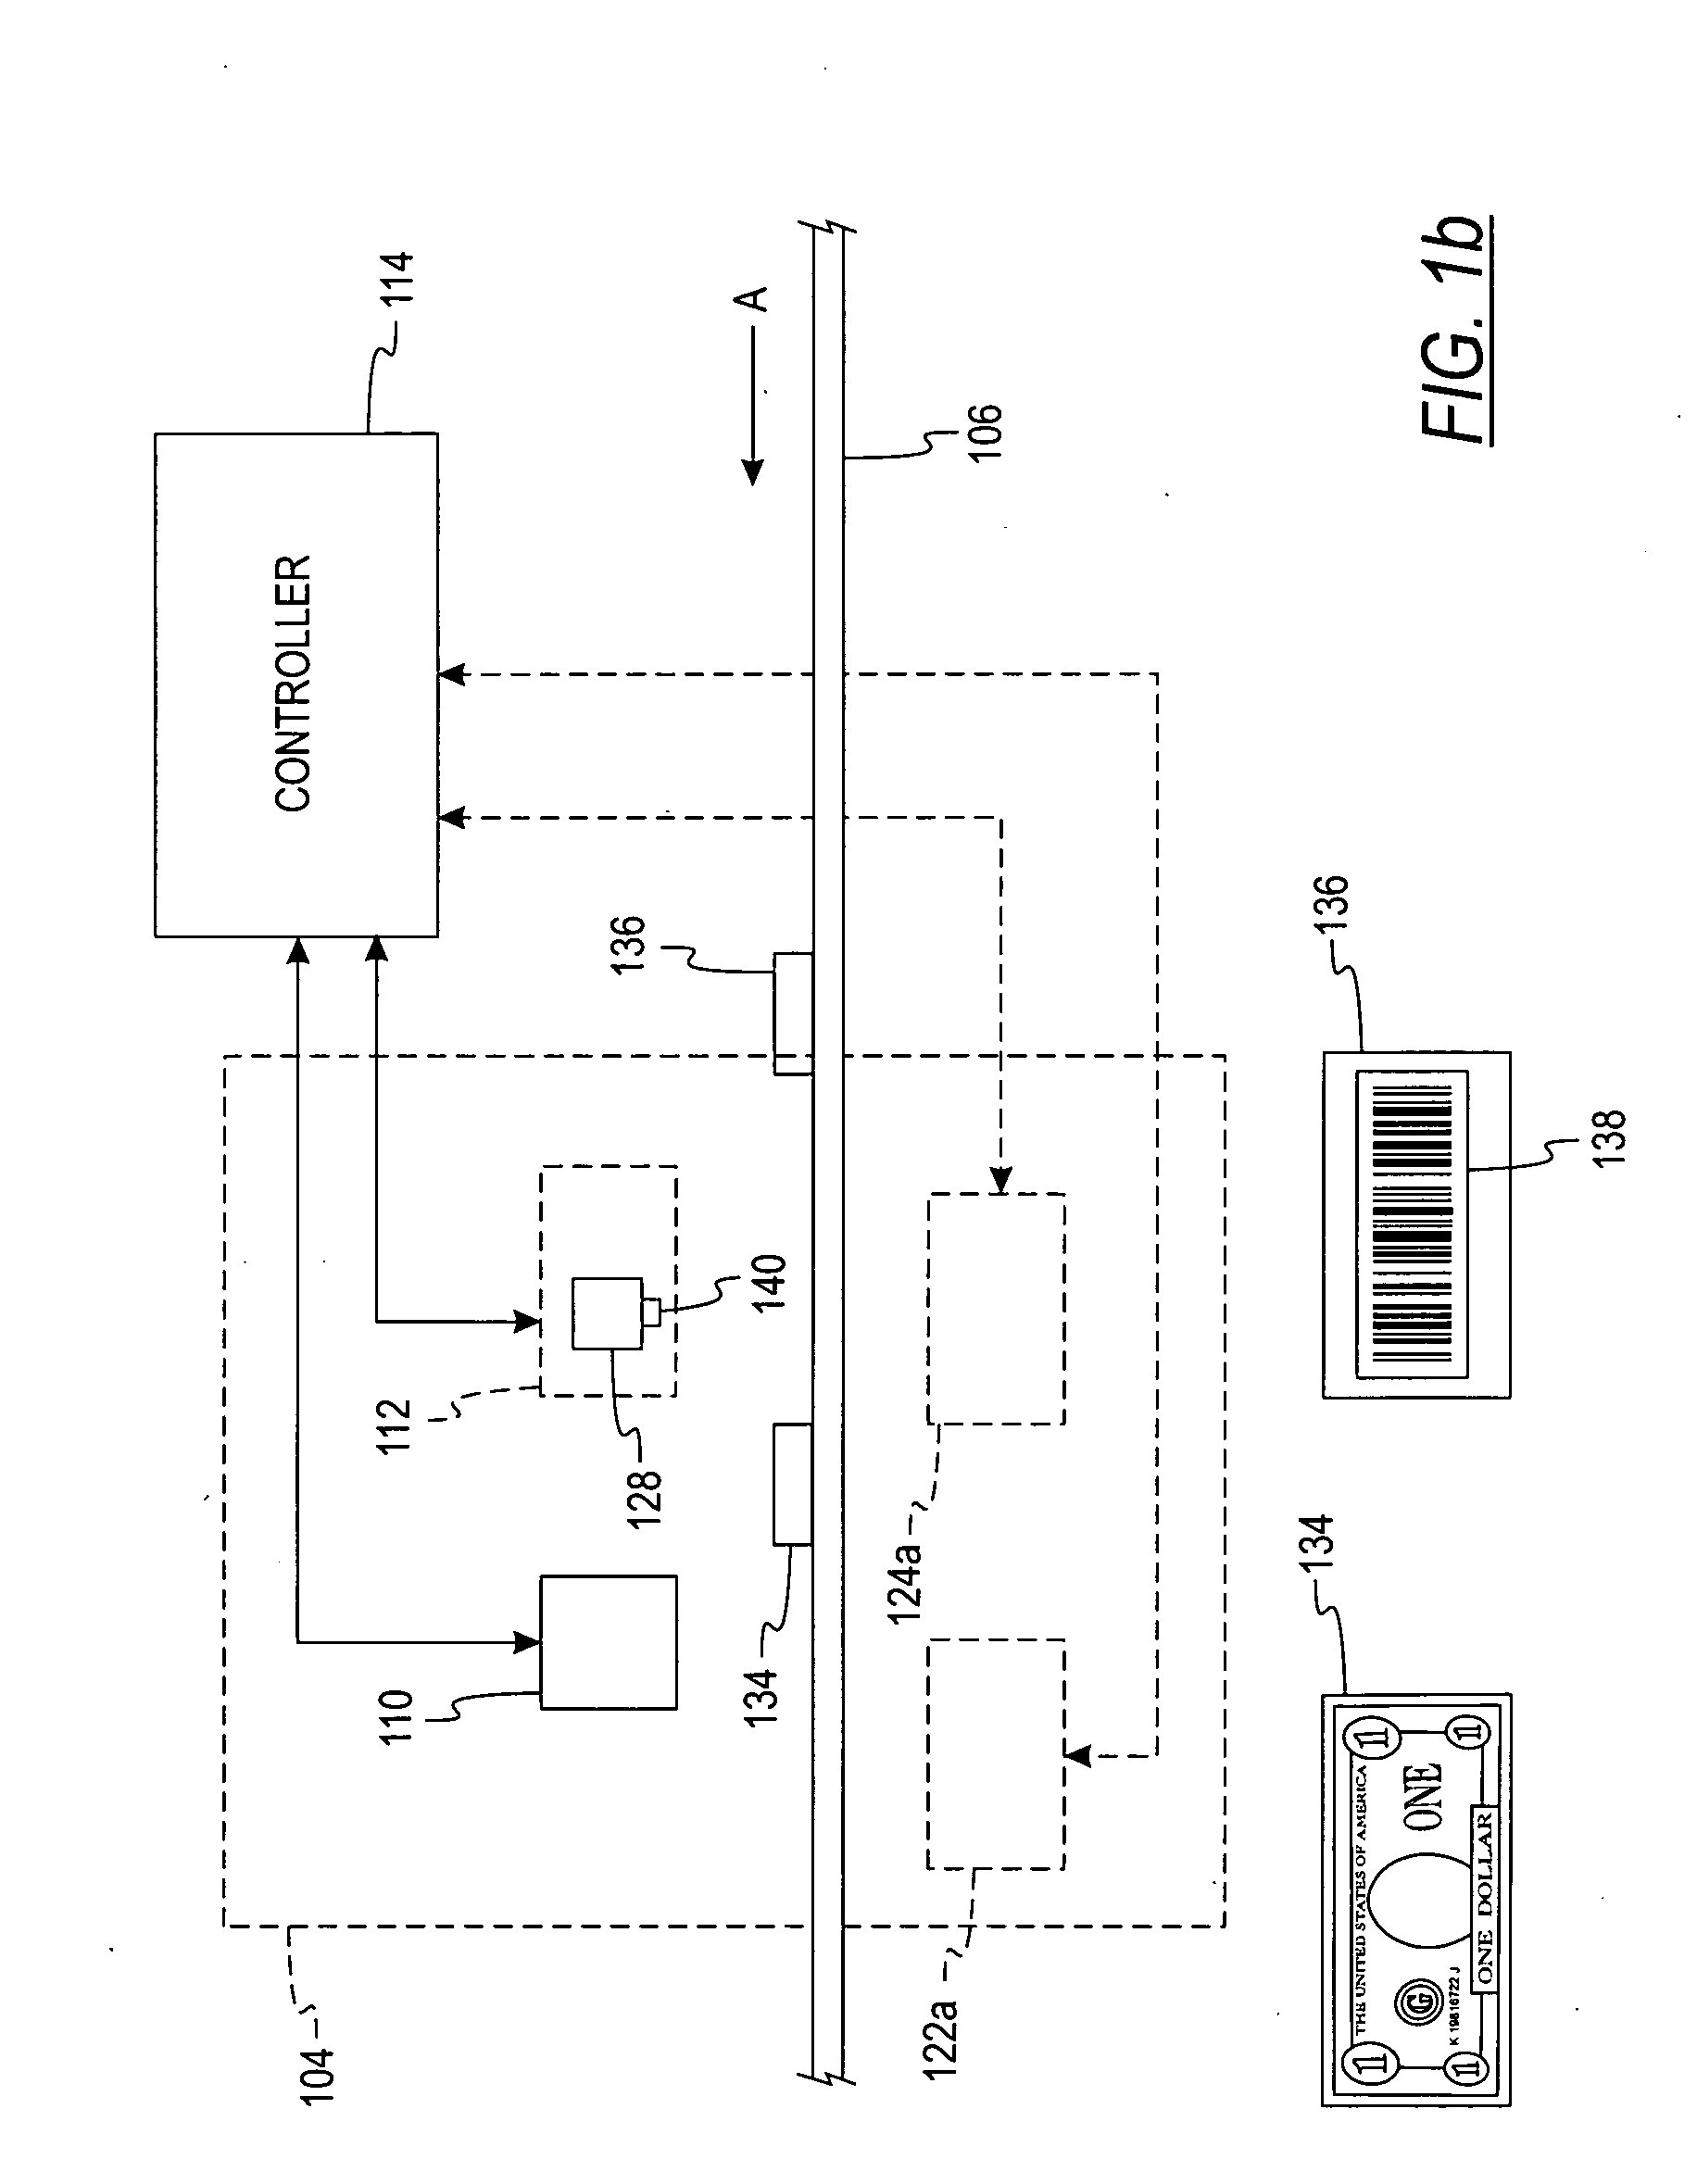 System and method for processing currency and identification cards in a document processing device